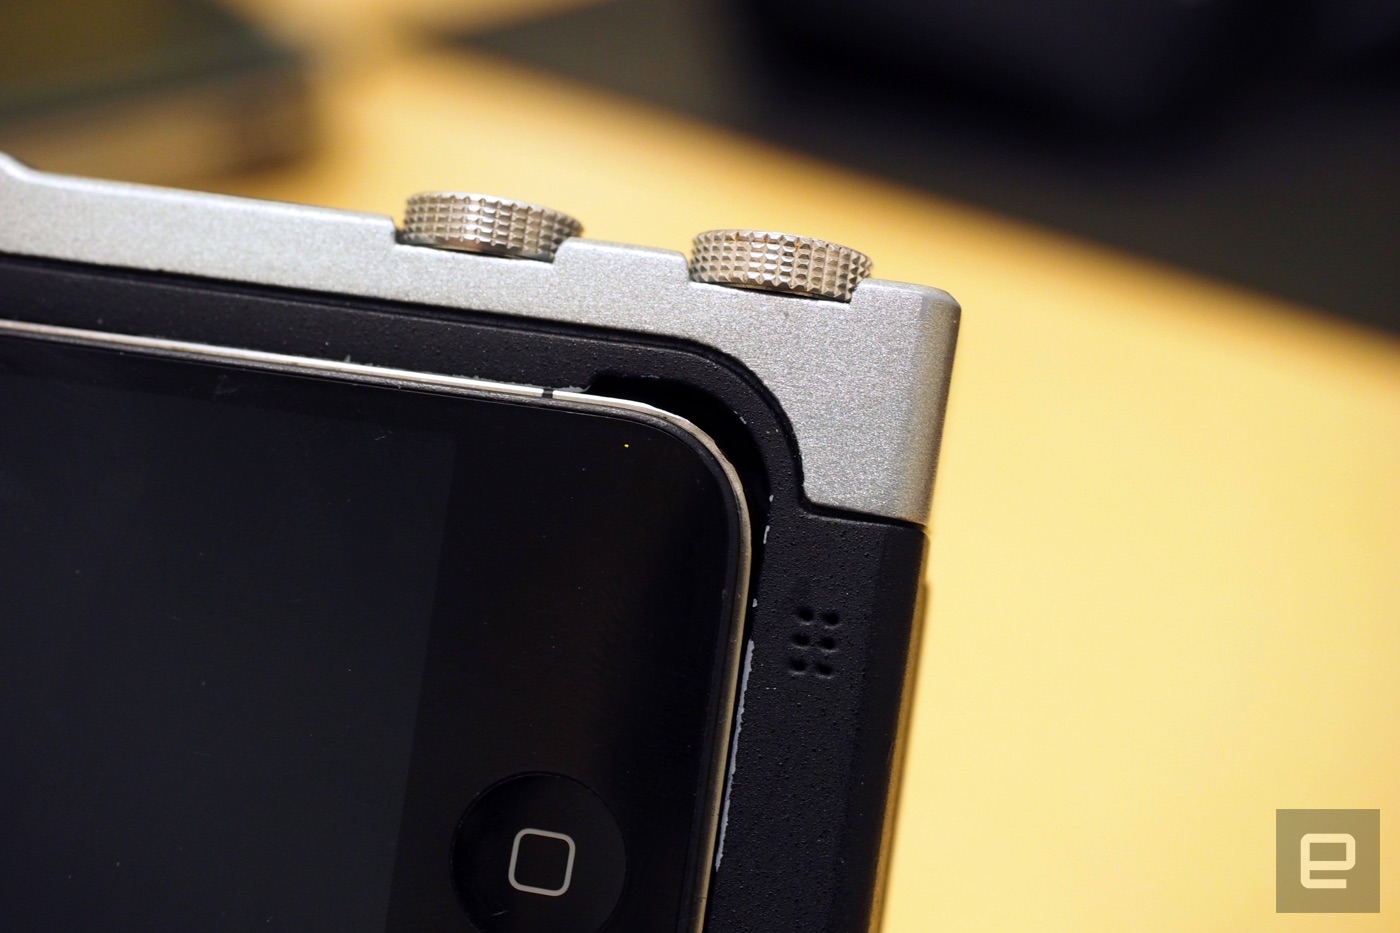 The Pictar brings SLR-style camera controls to (most) iPhones